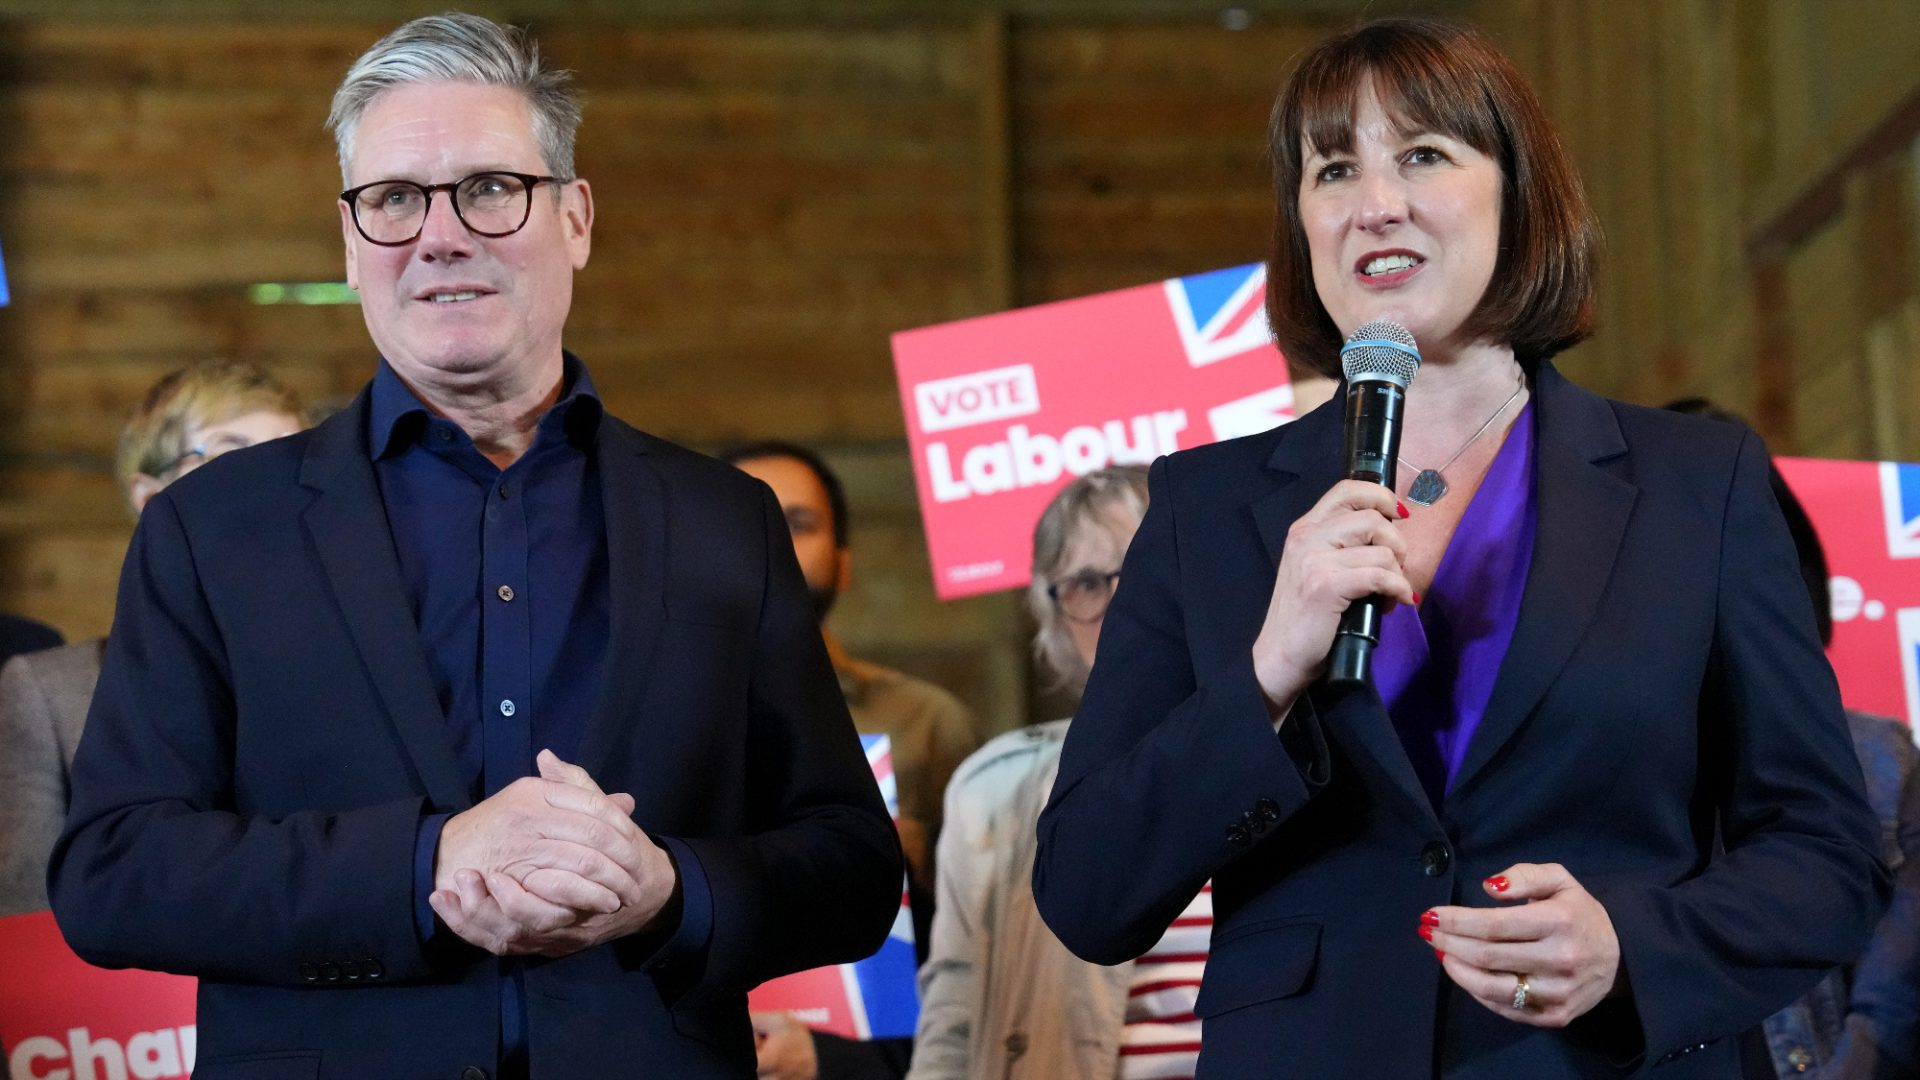 Labour’s election campaign has been an unispiring one; the hope is that the country will be back in safe hands. Photo: Carl Court/Getty